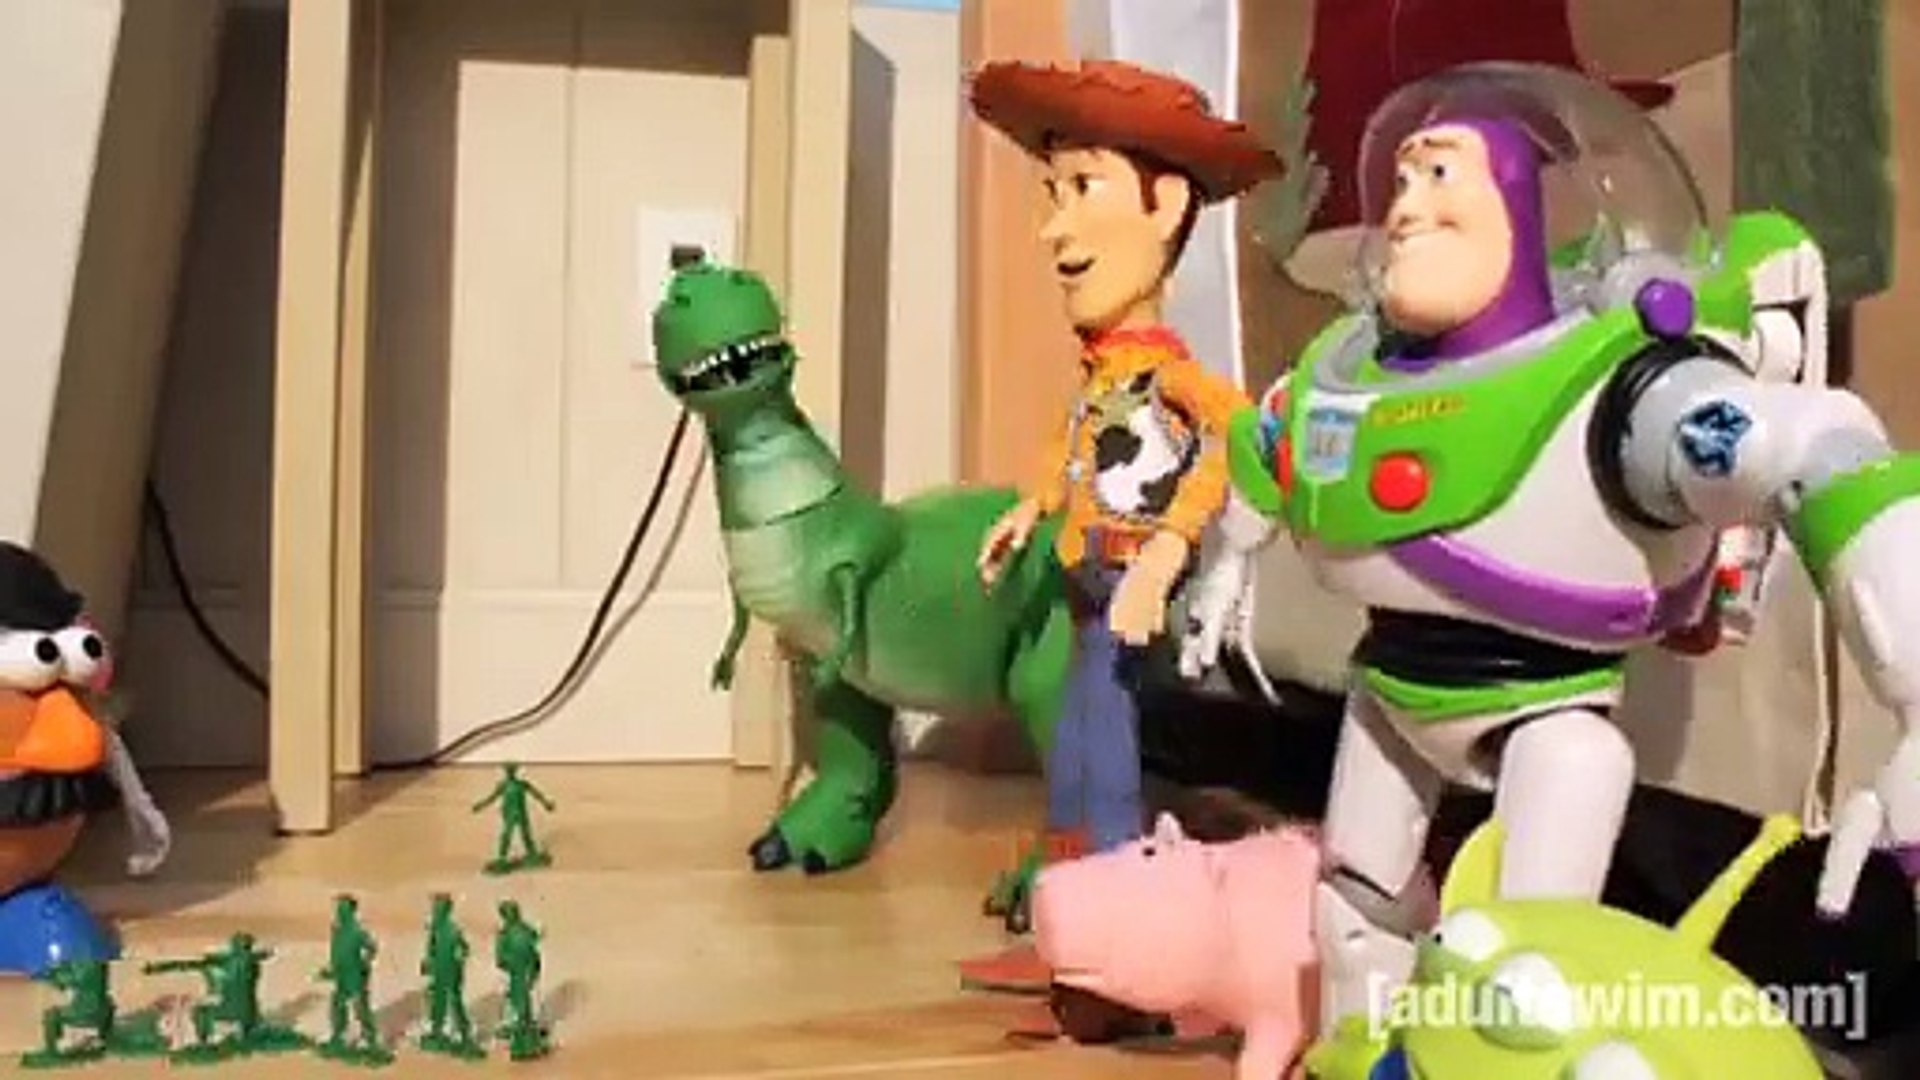 Toy Story 4 | Robot Chicken | Adult Swim - Dailymotion Video